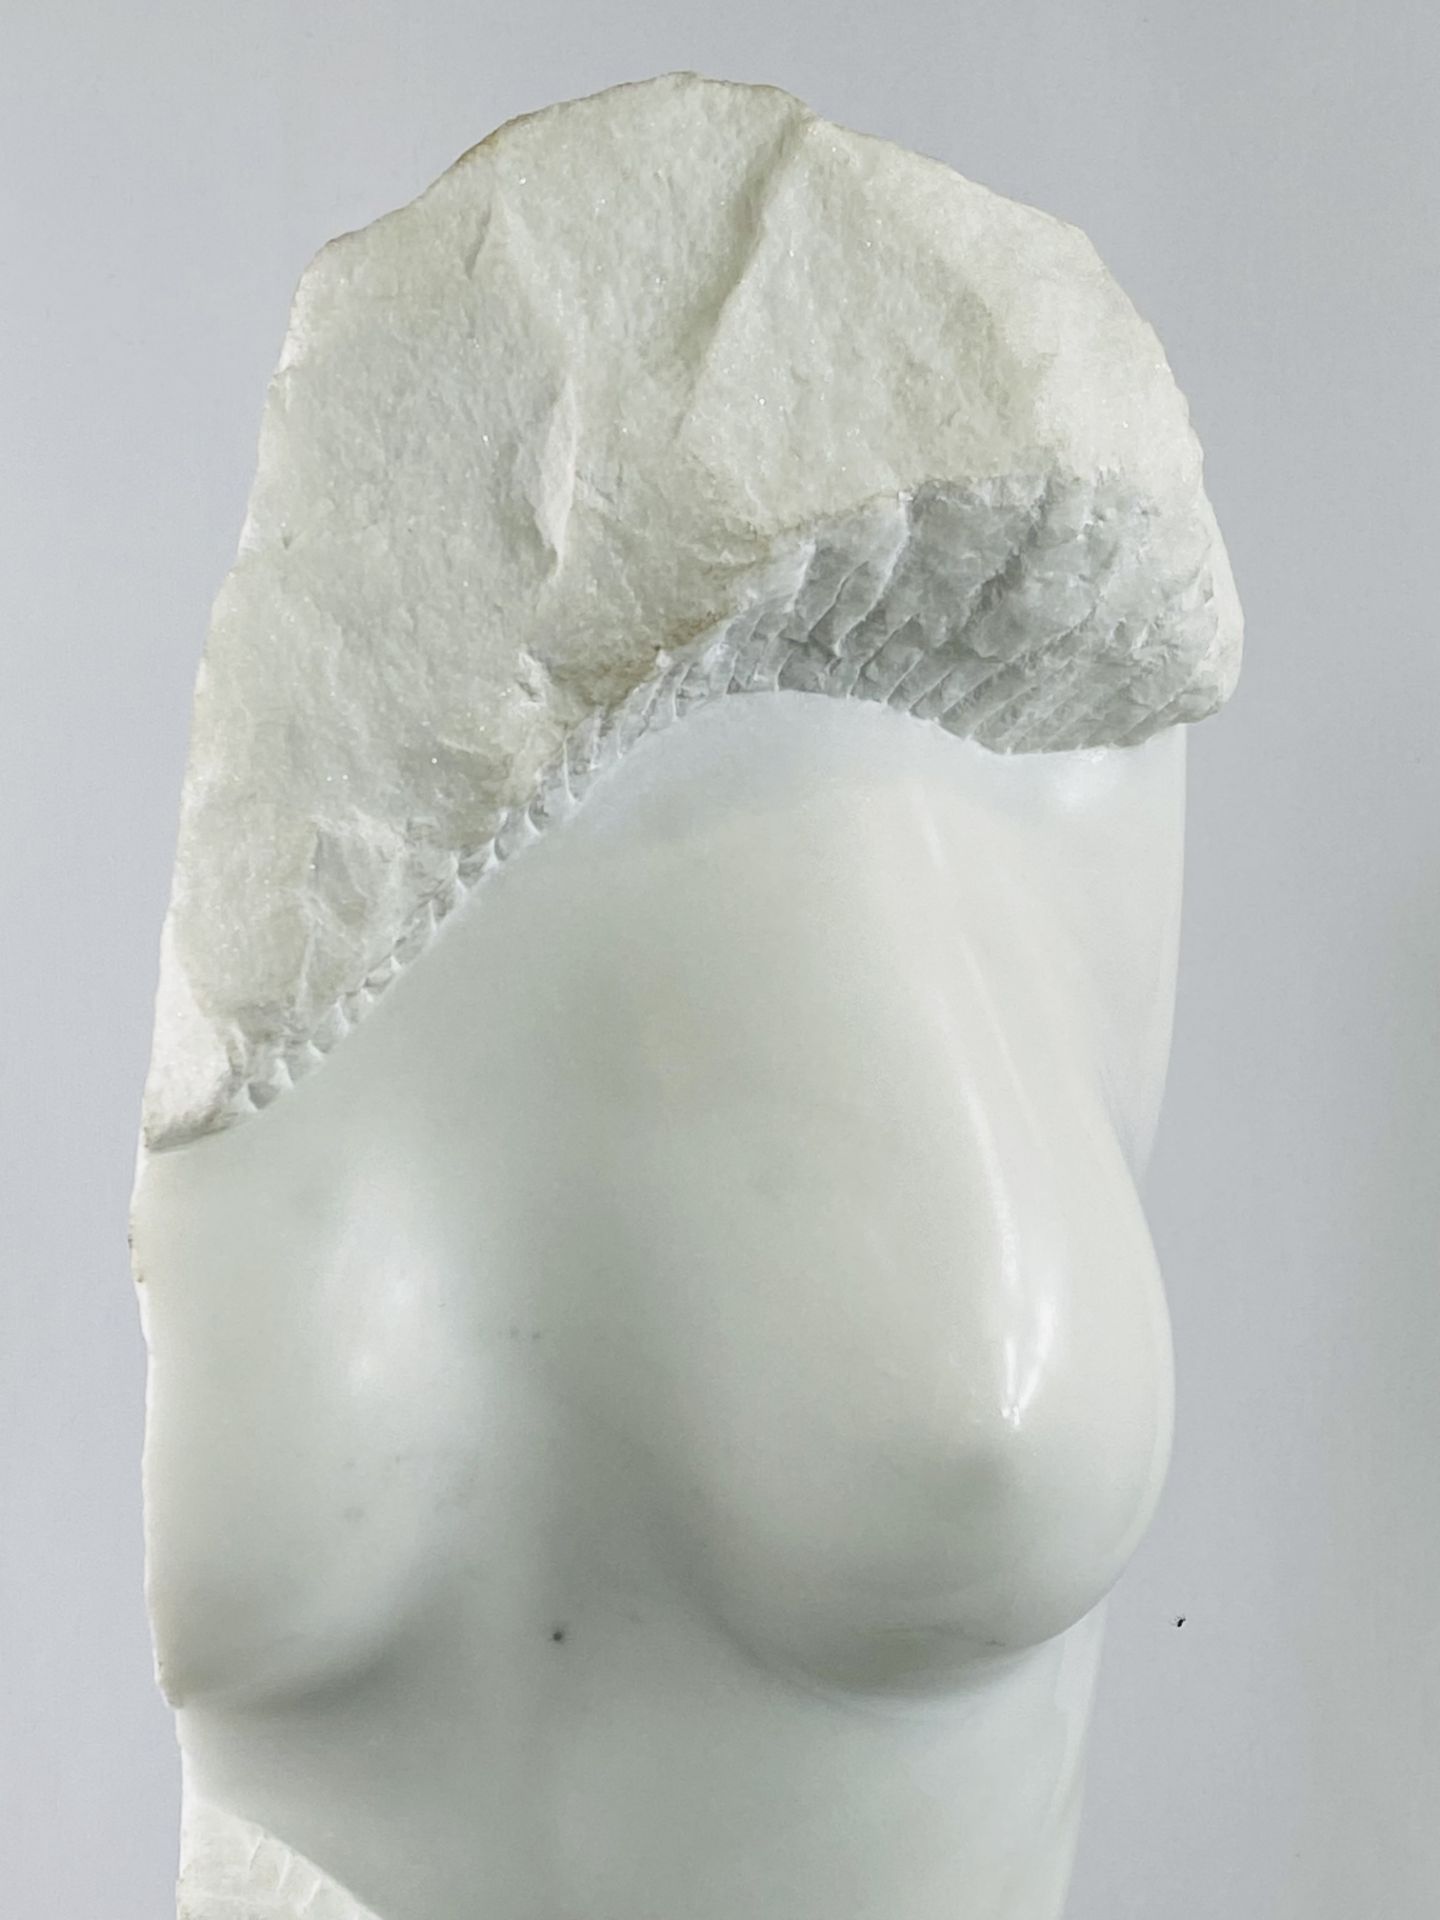 Marble sculpture of female nude torso with signature - Image 7 of 11